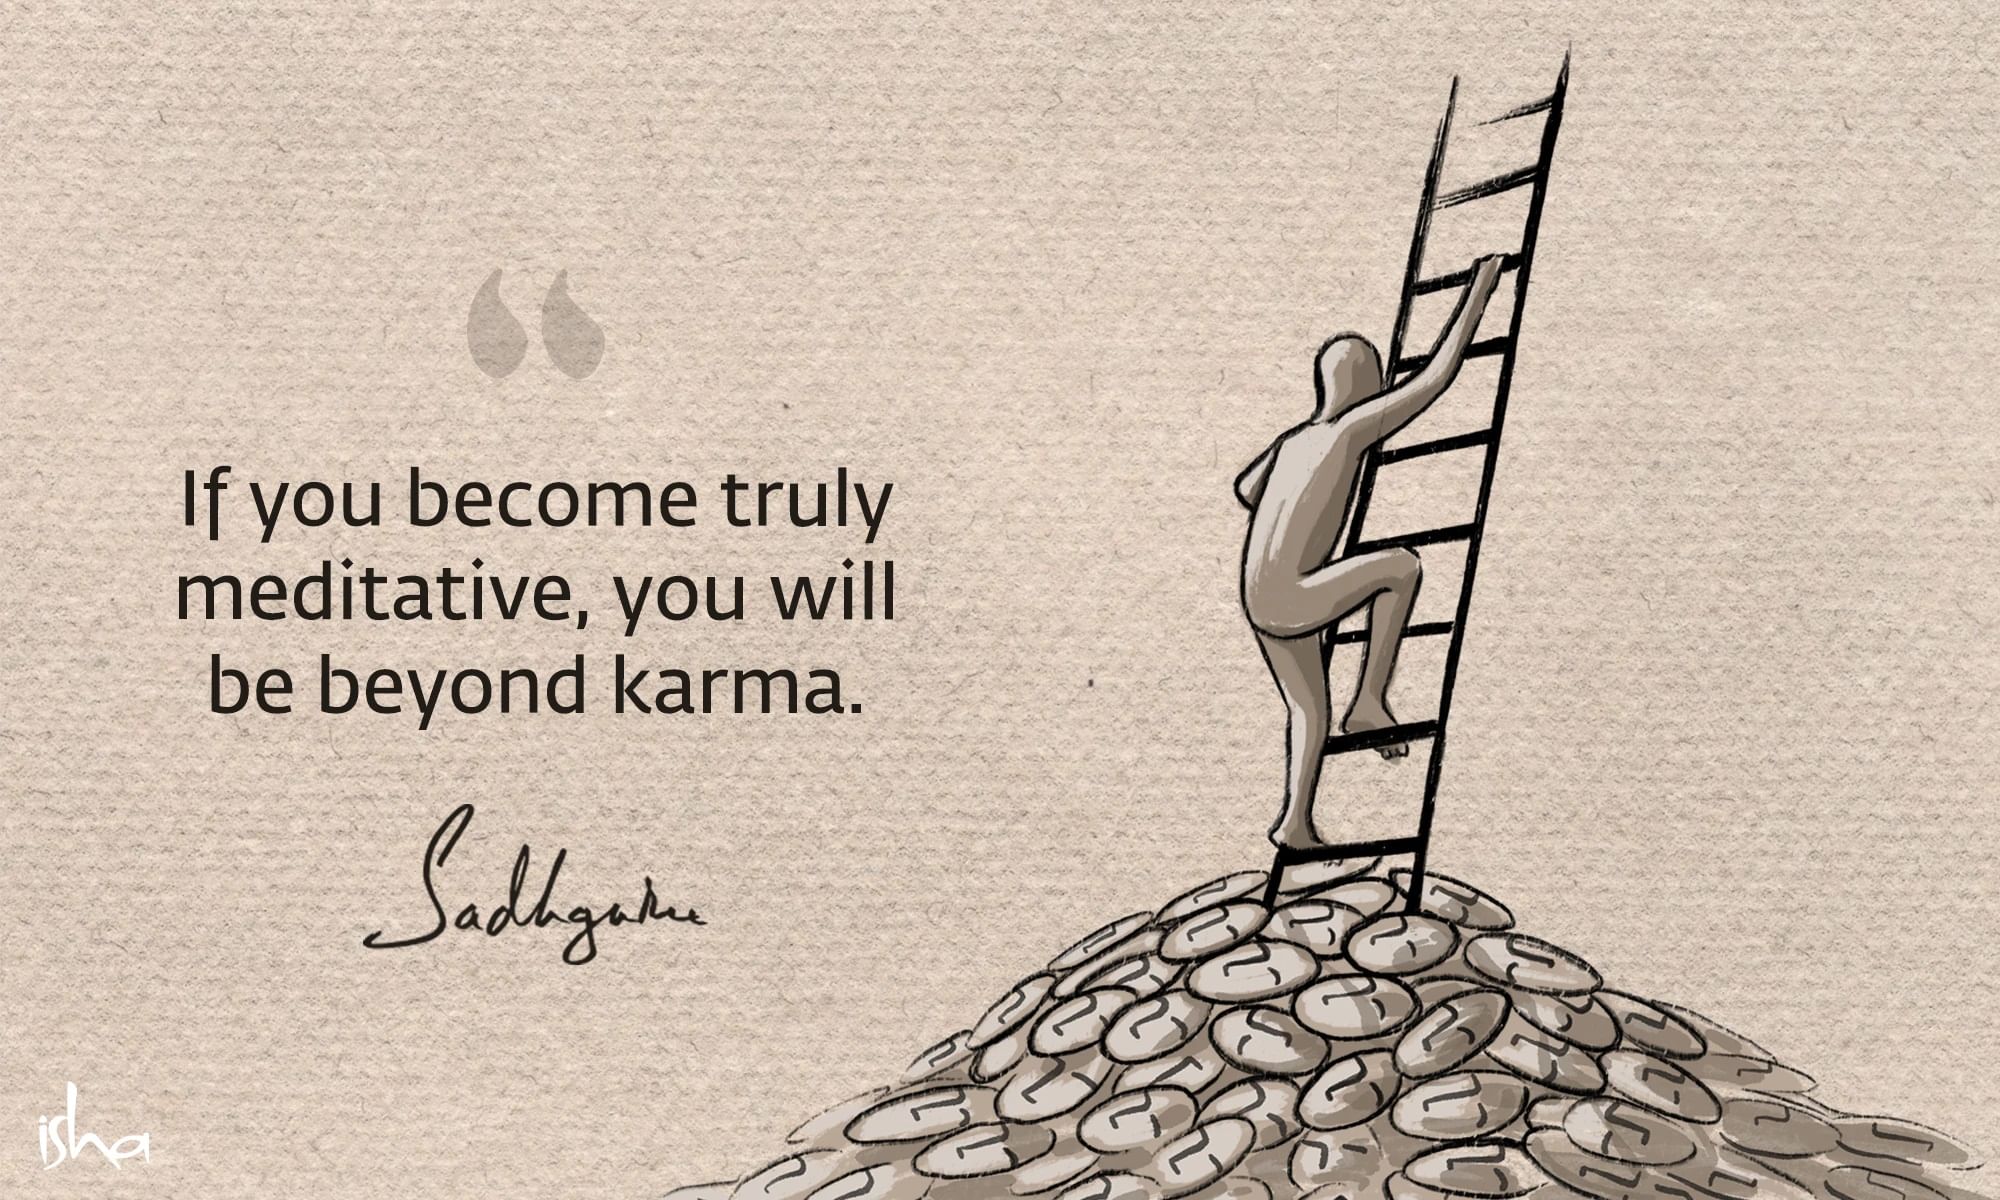 Quote on karma showing figurine going beyond its karma using the ladder of meditation.